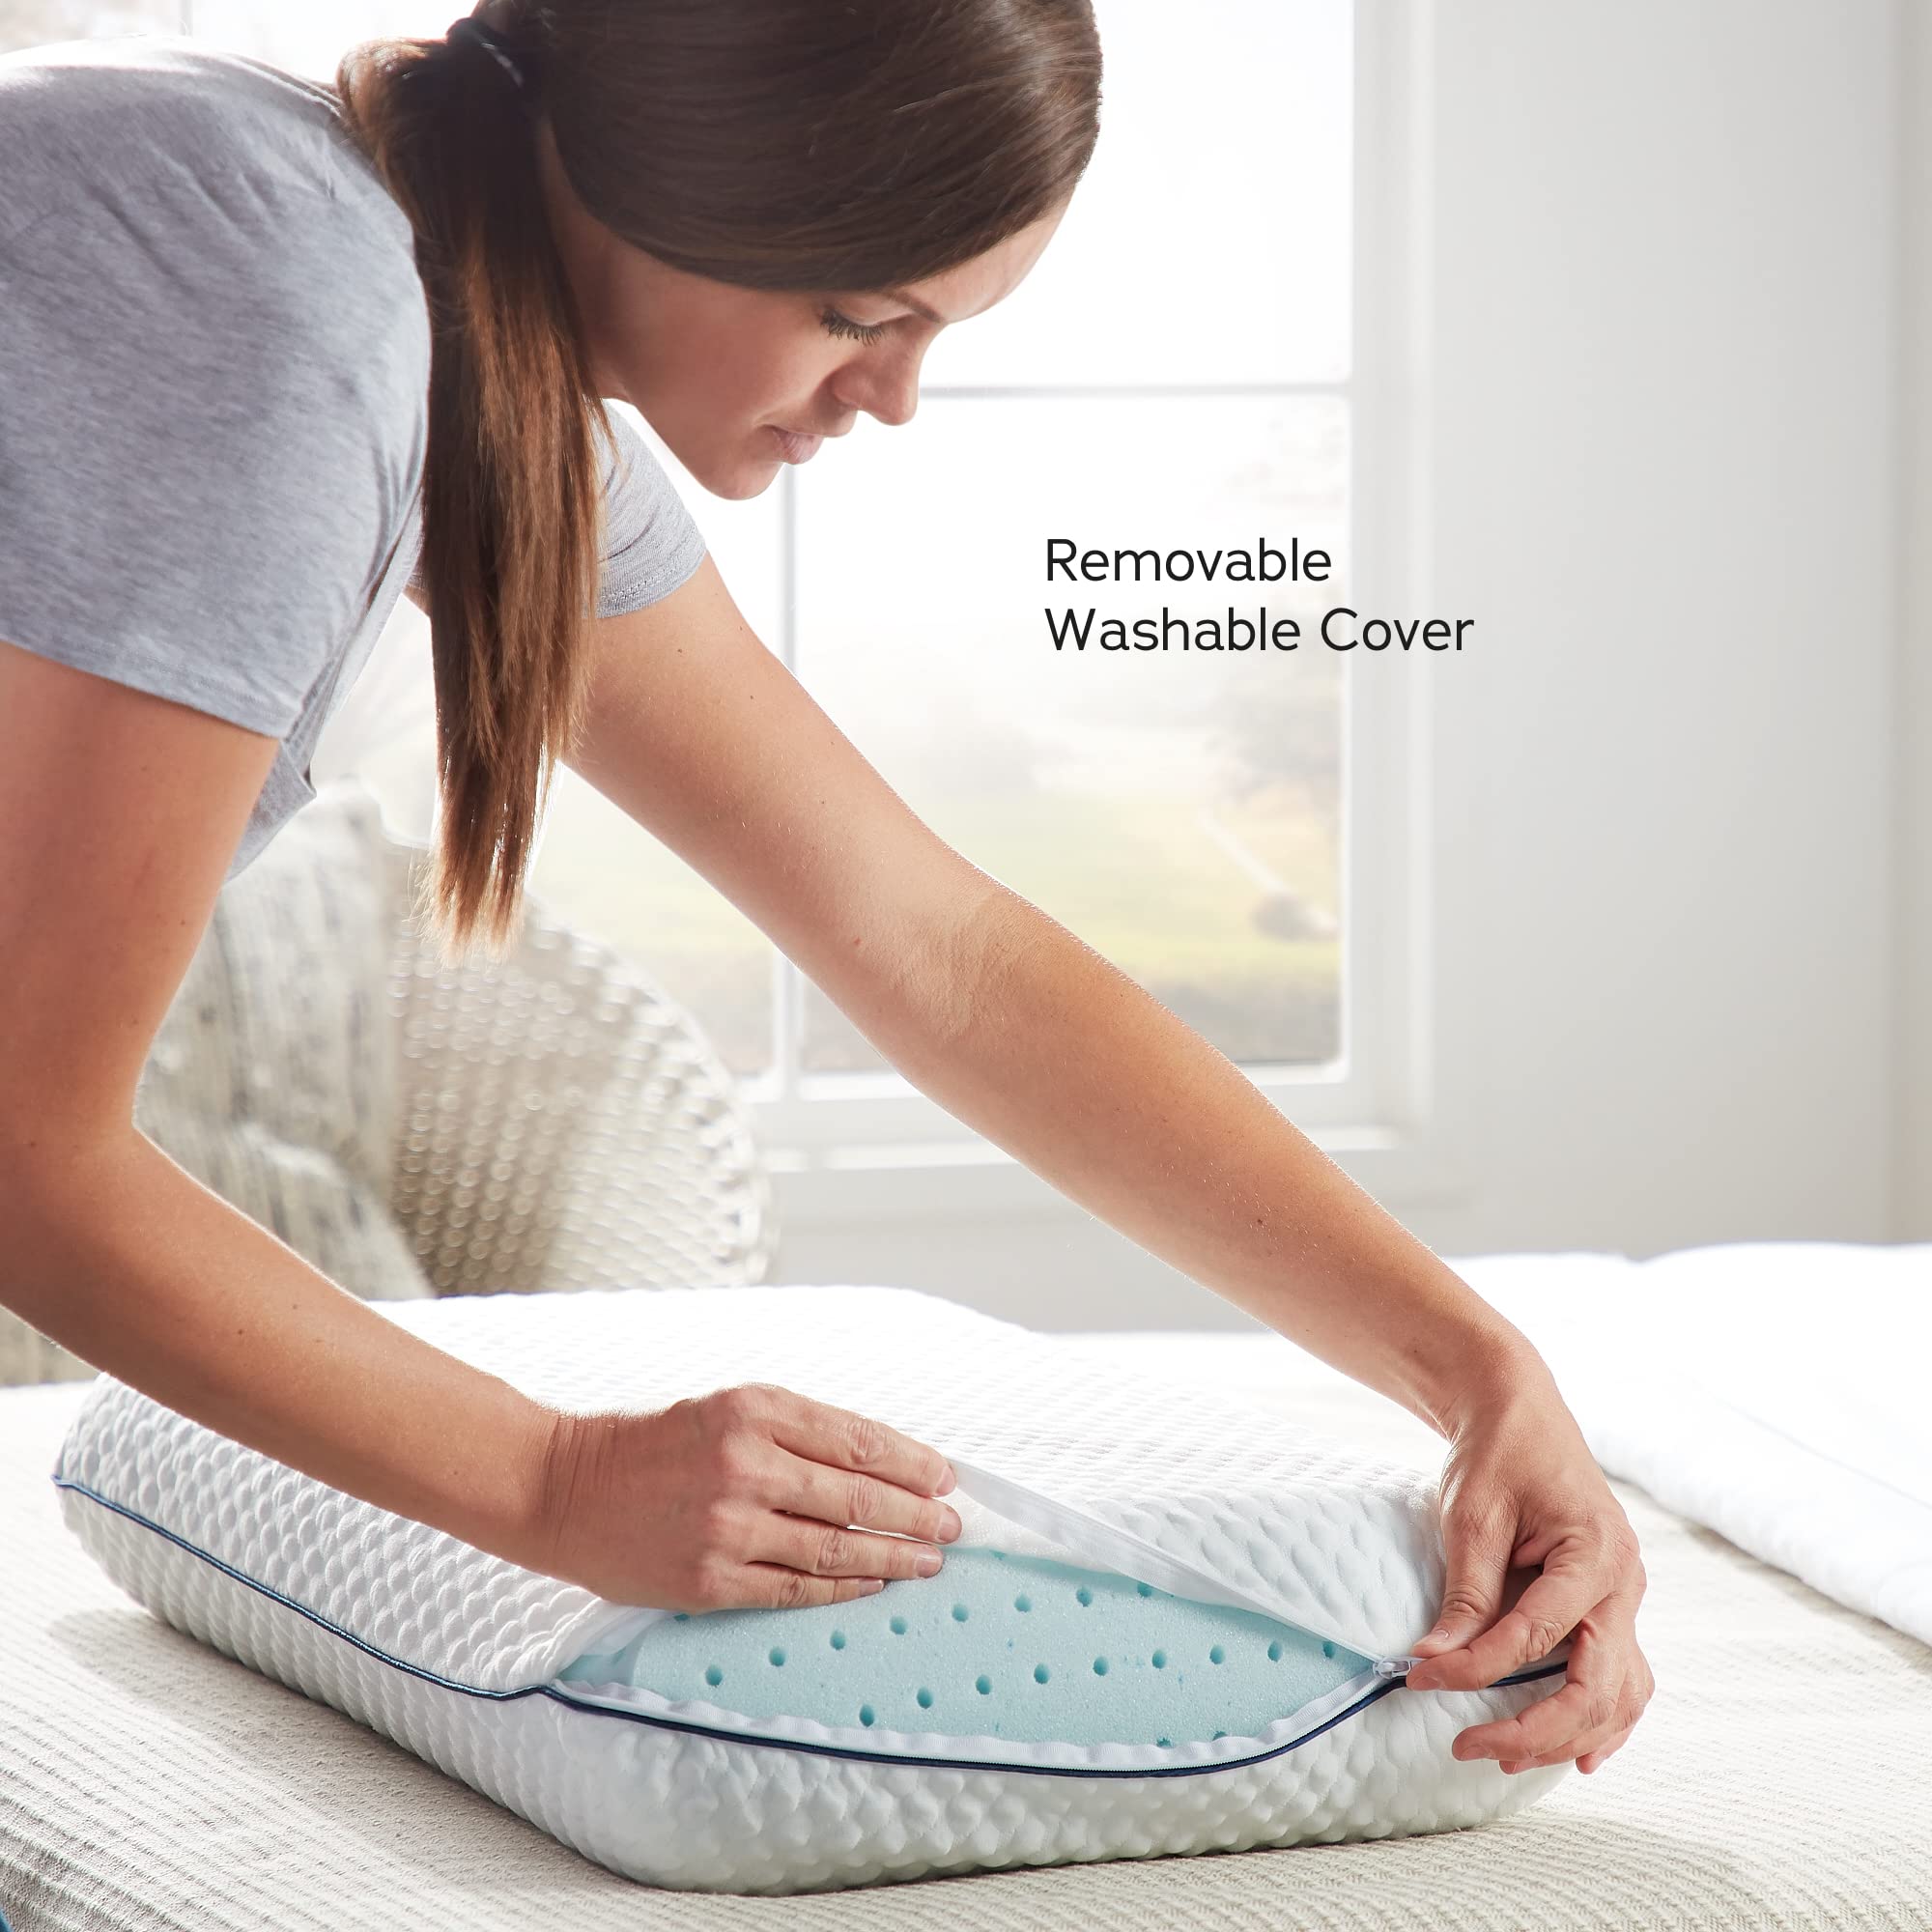 Weekender Gel Memory Foam Pillow – Cooling & Ventilated - 1 Pack Queen Size - Premium Washable Cover White